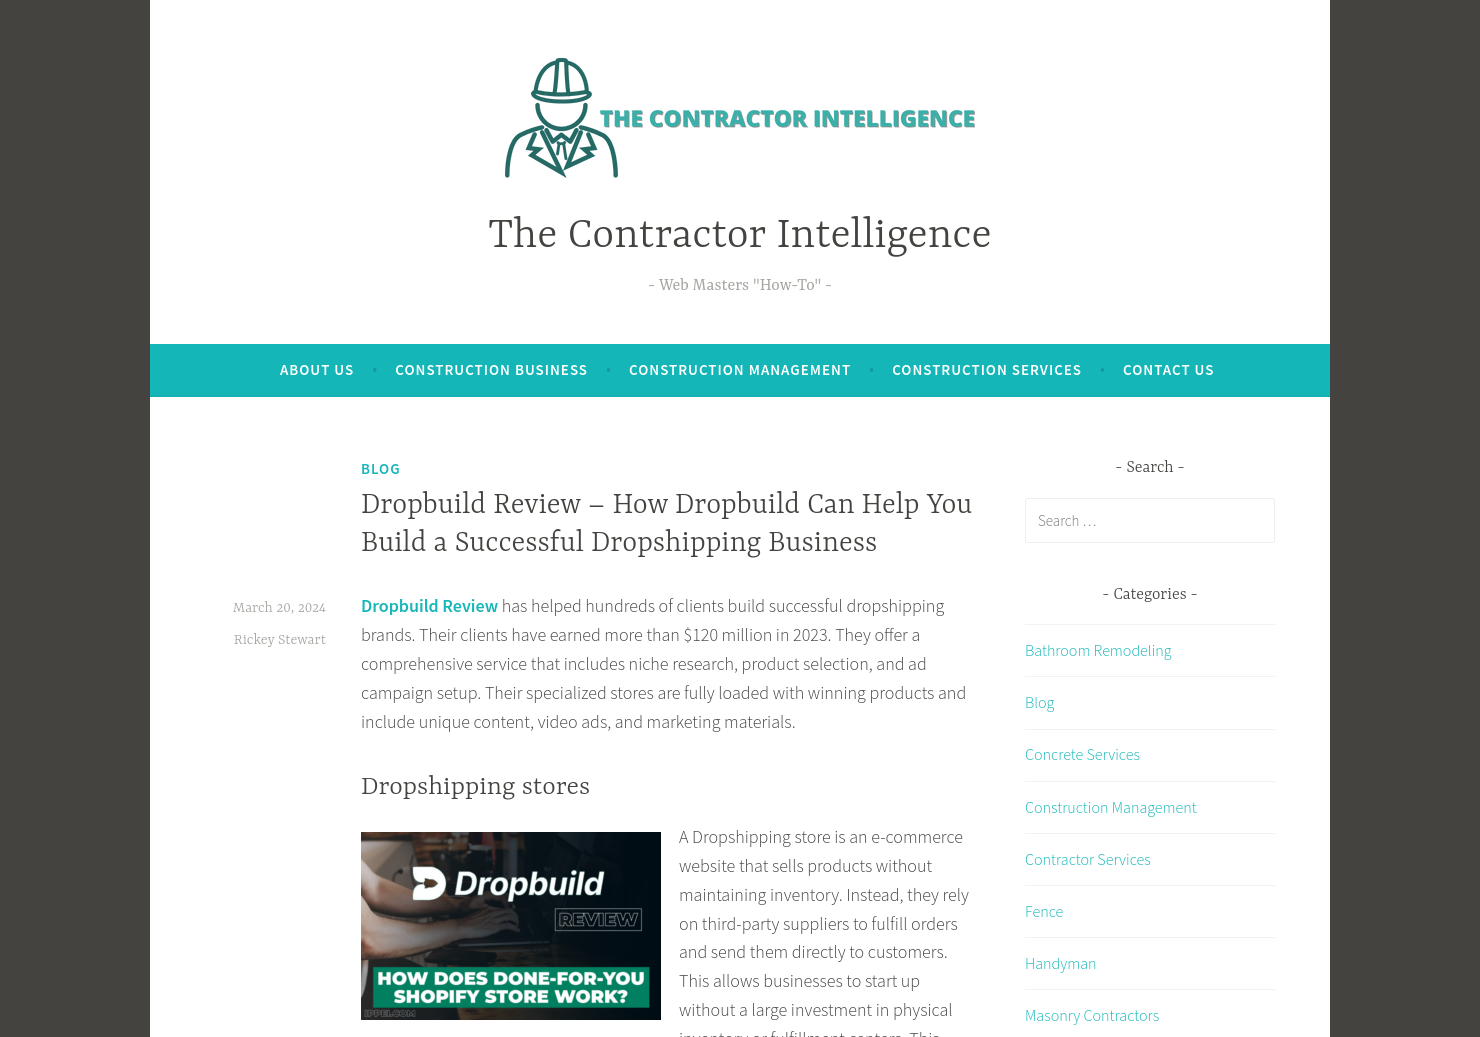 Contractor Intelligence